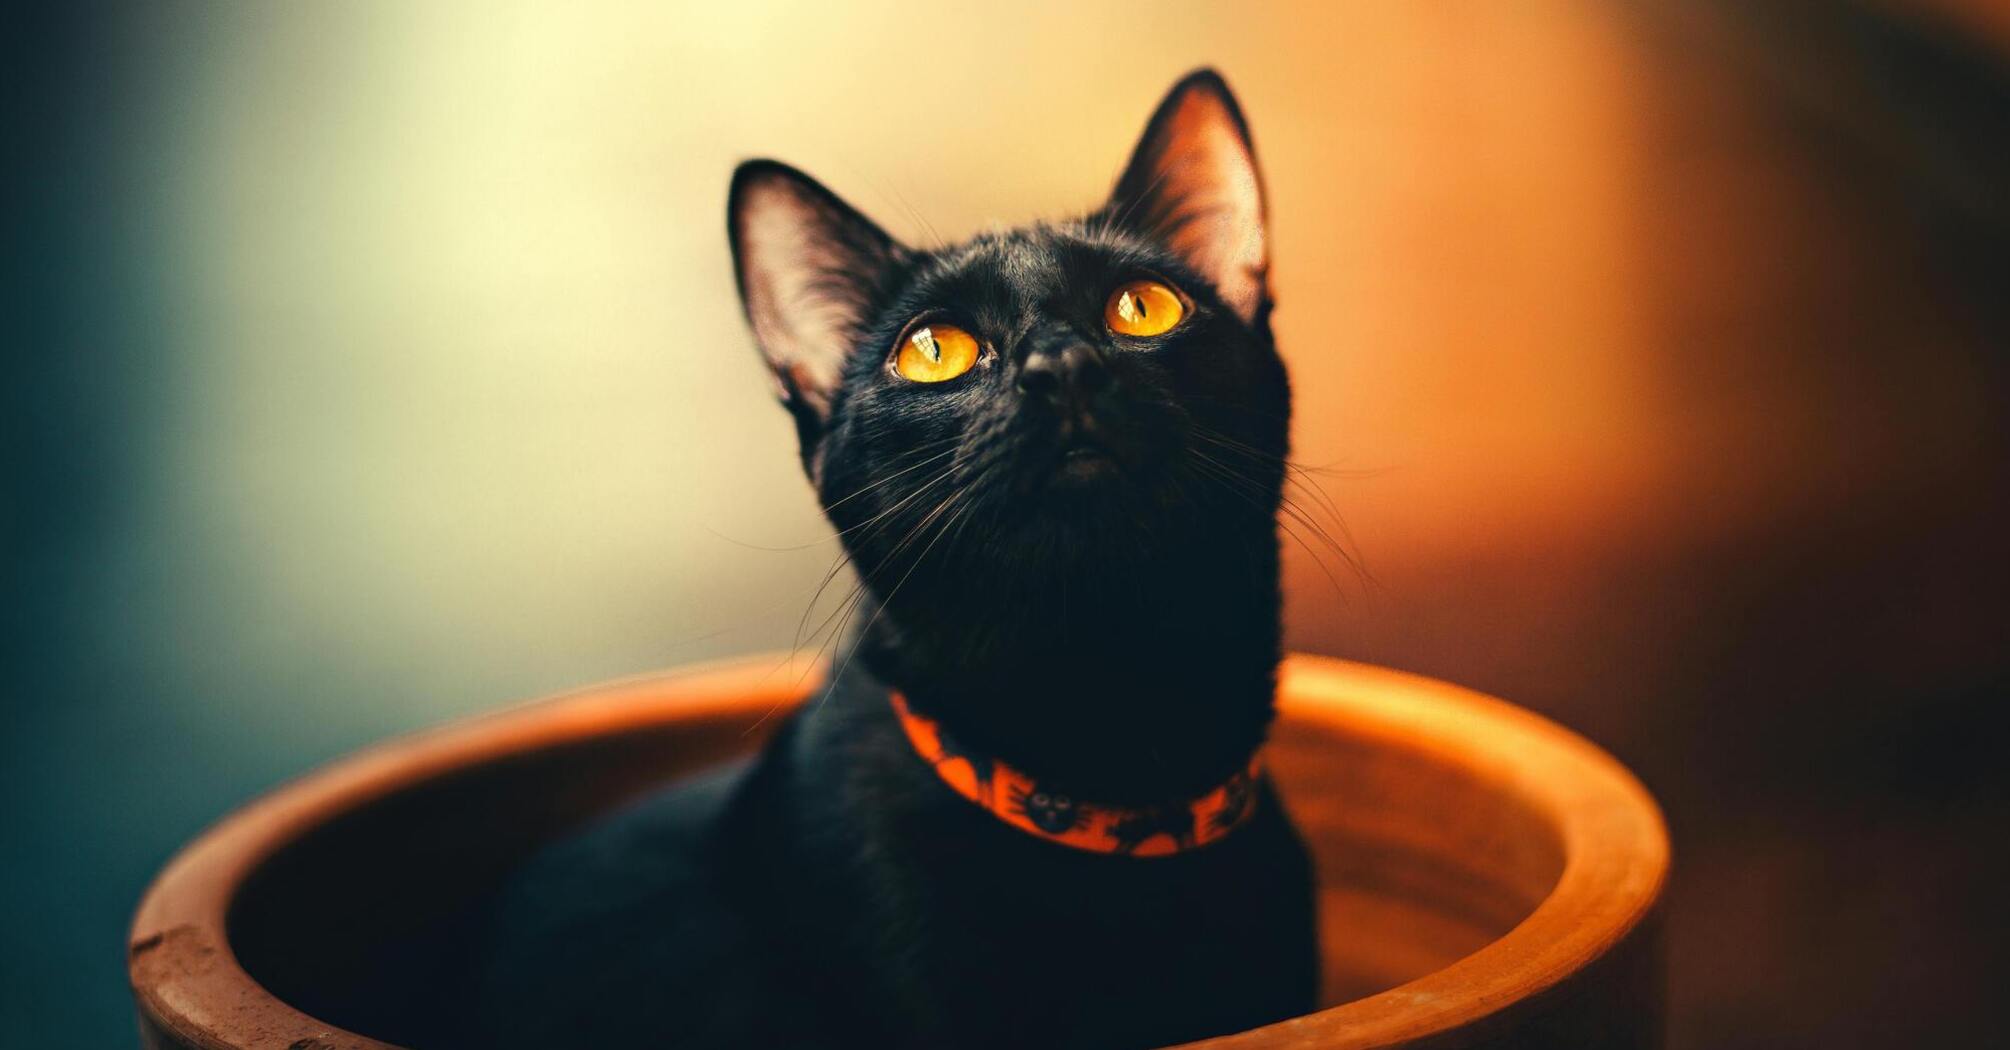 The significance of the black cat